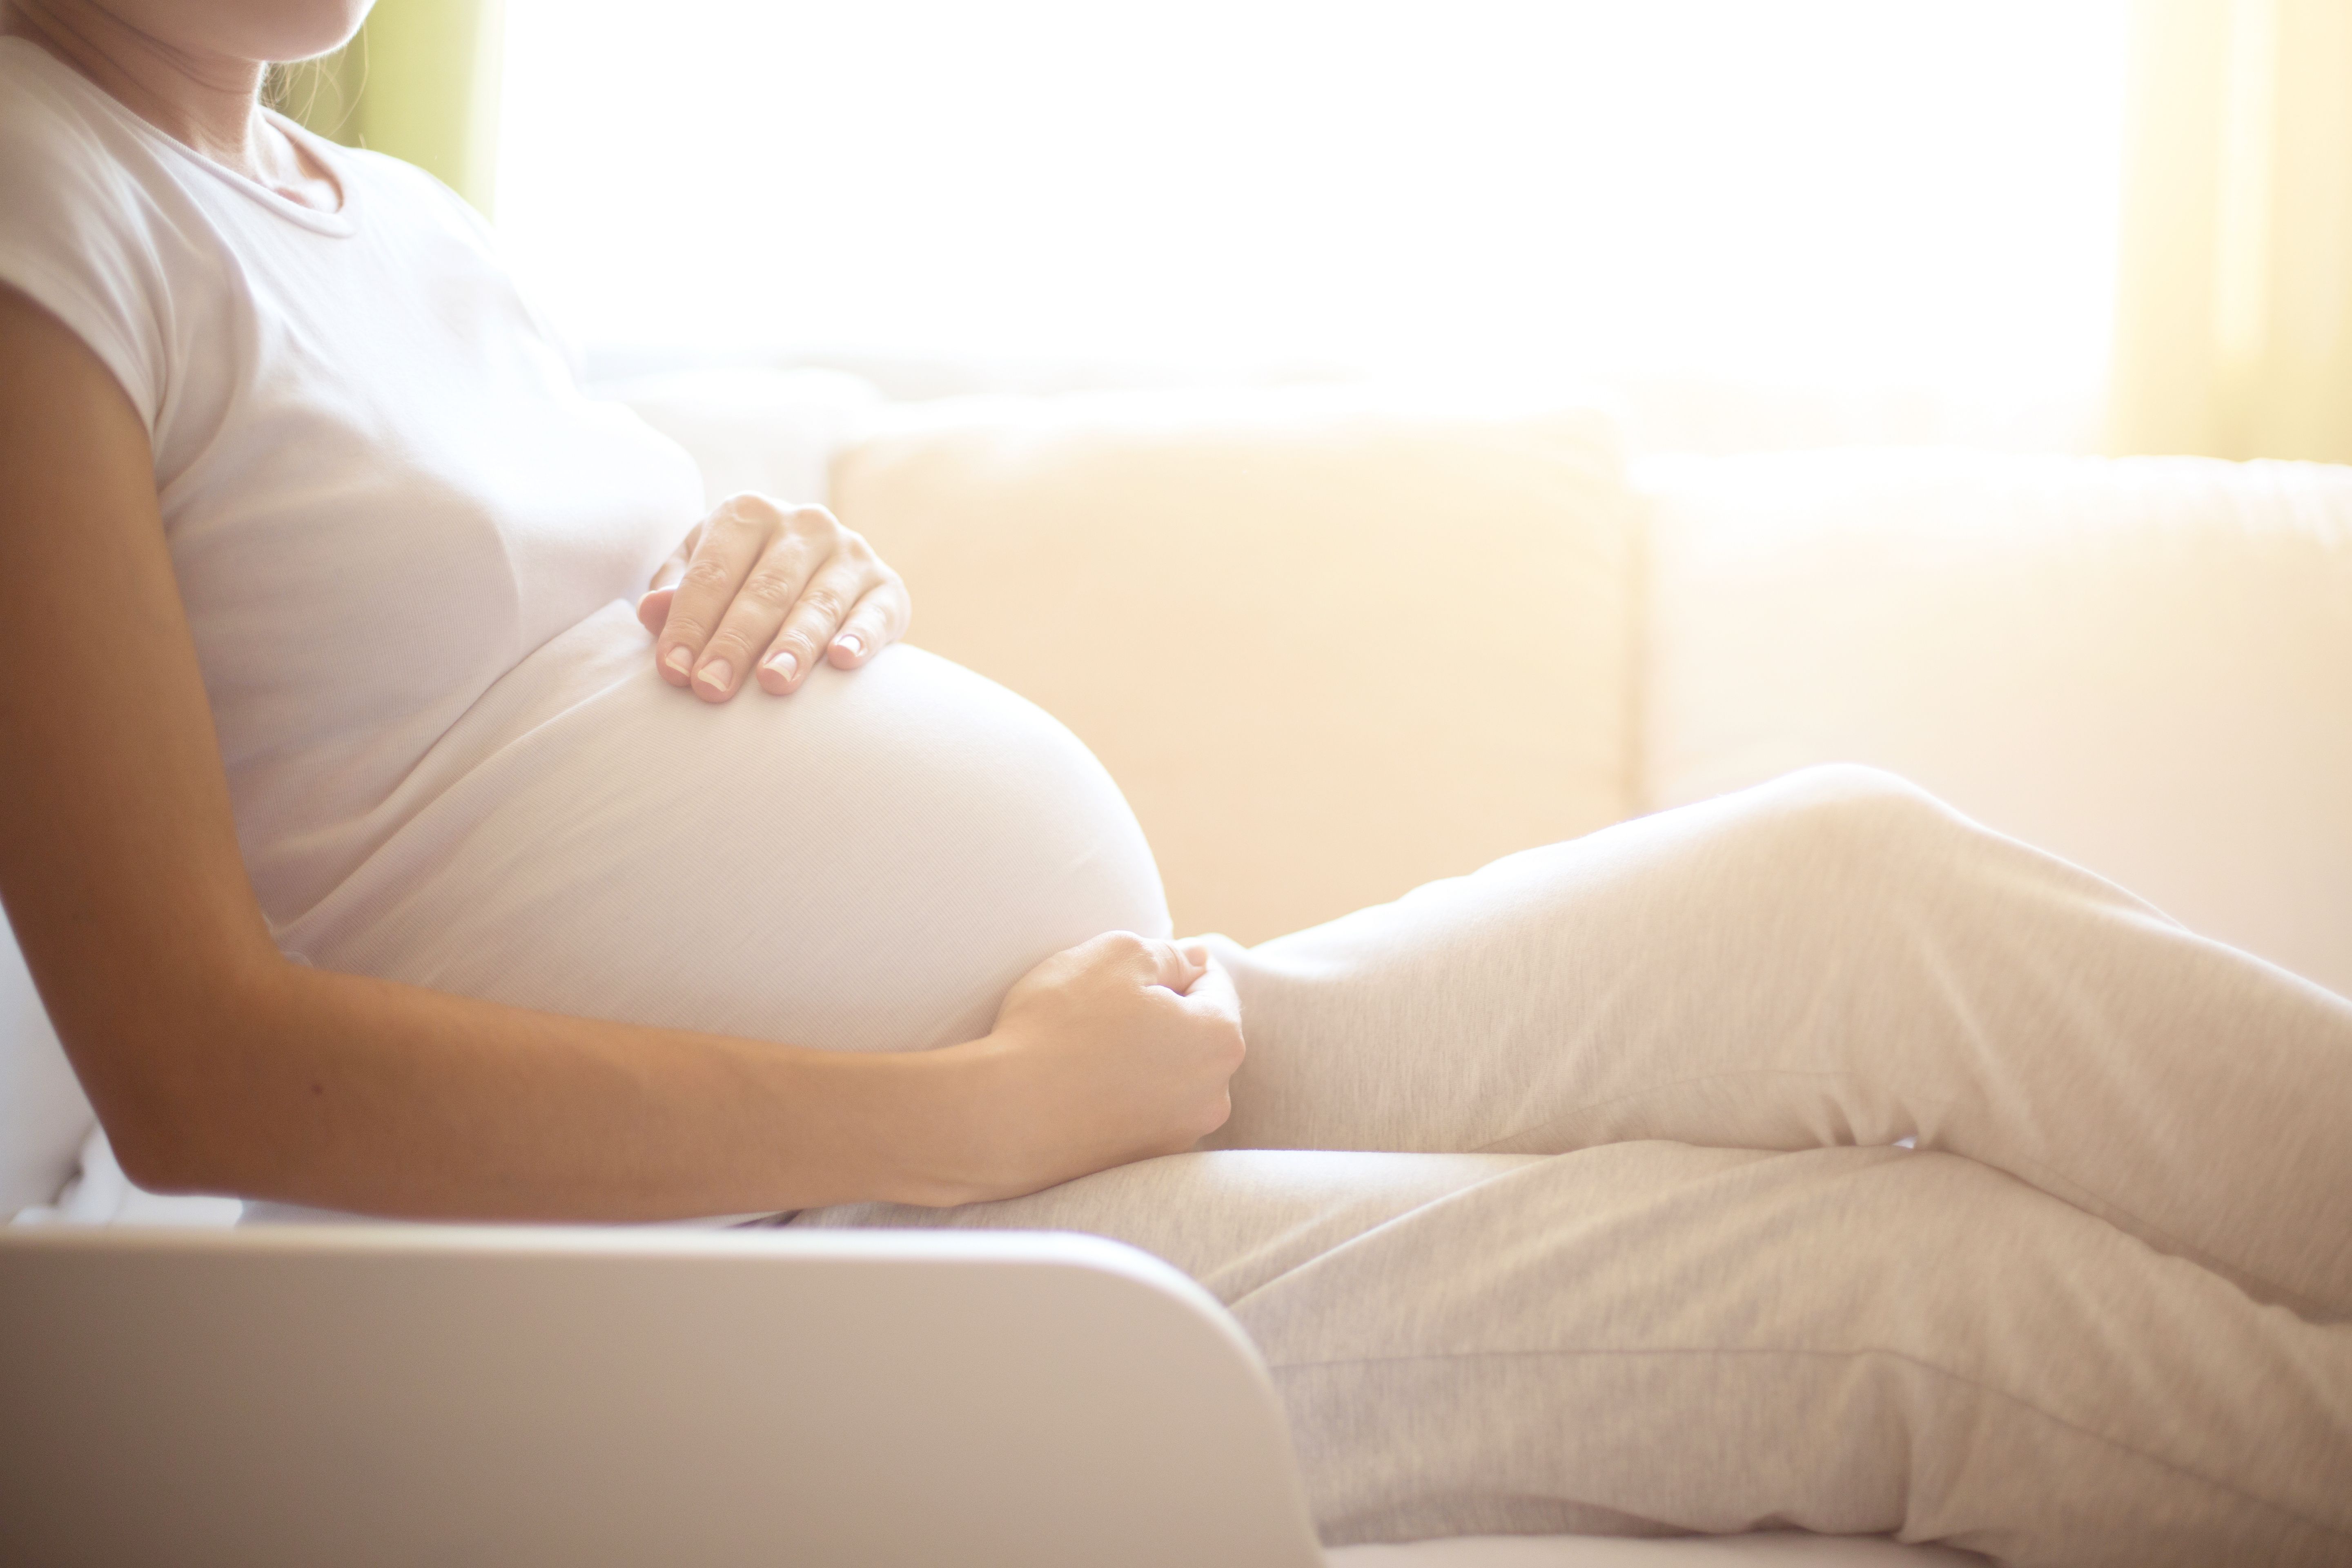 Pregnancy-associated melanoma is a rare occurence that impacts 1 in 2200 pregnancies | image credit: Alik Mulikov - stock.adobe.com 